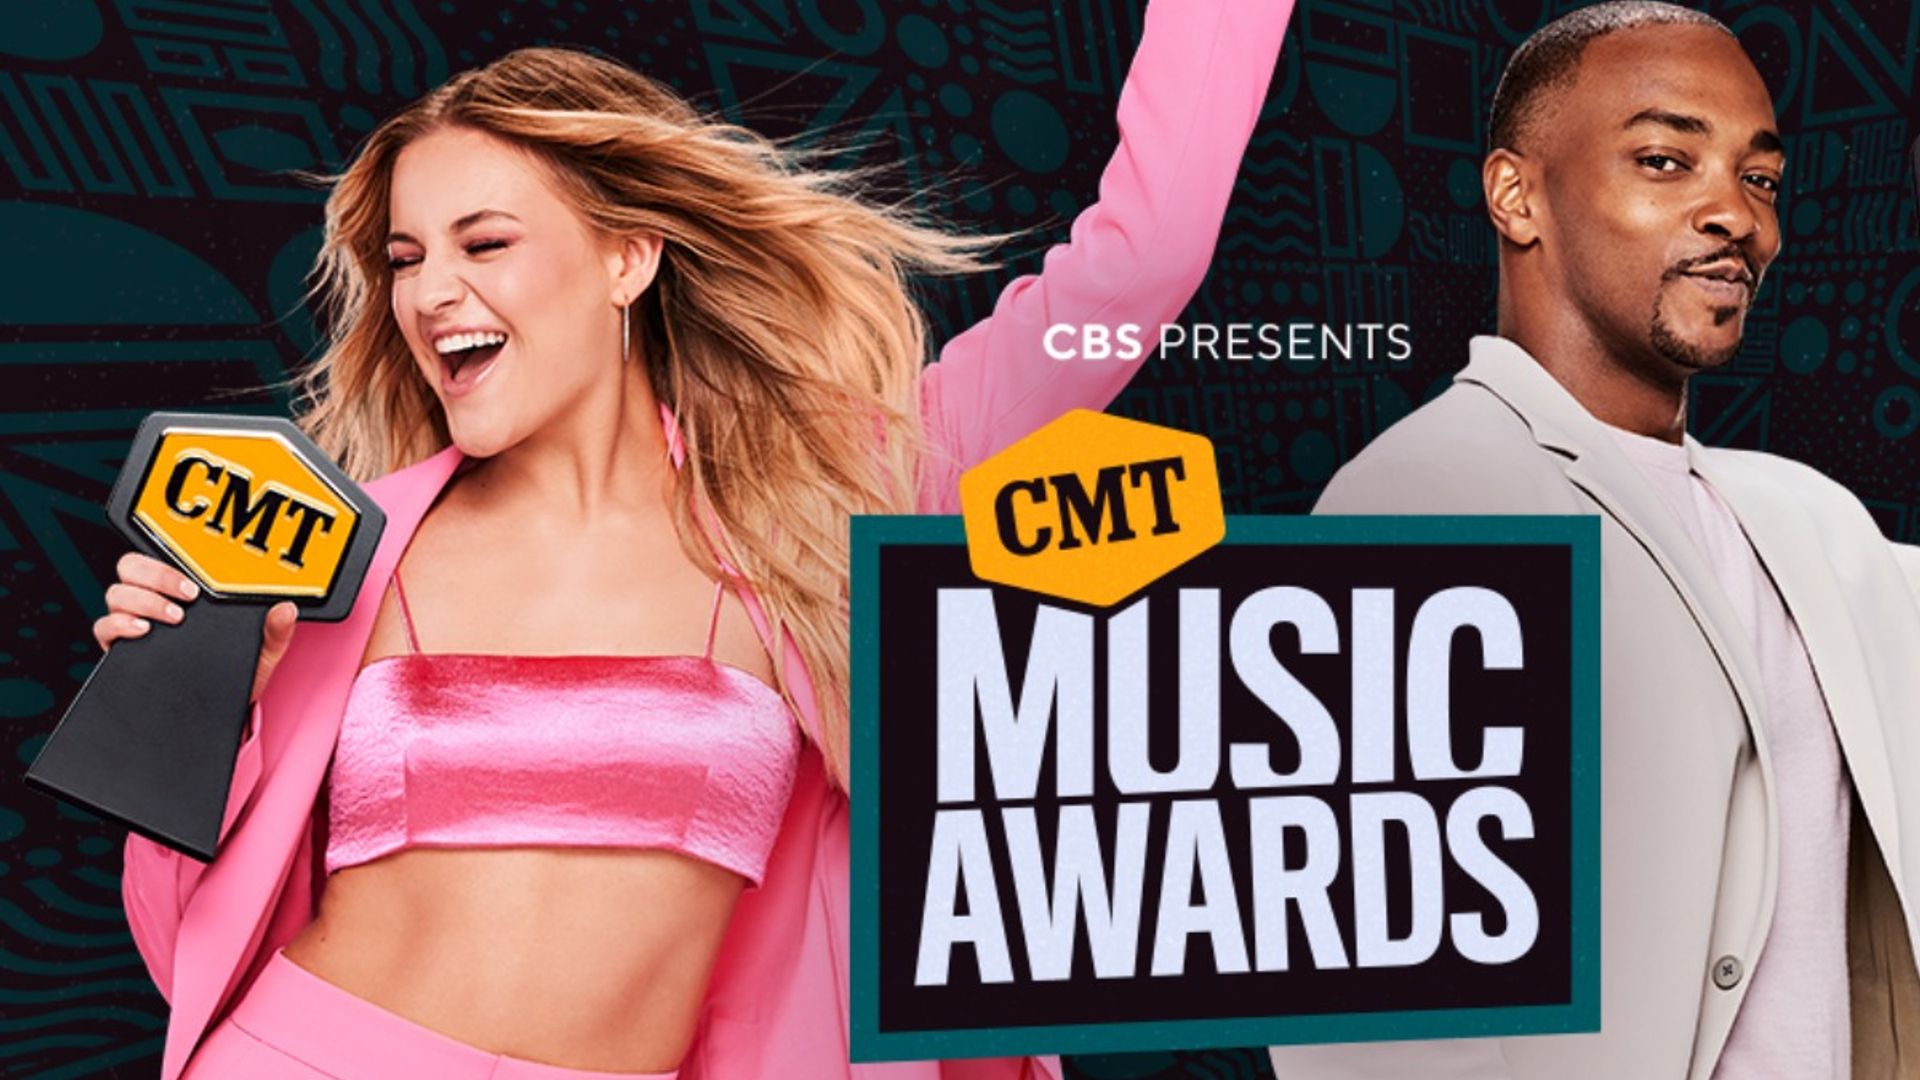 Carrie Underwood and Jason Aldean sweep the 2022 CMT Music Awards